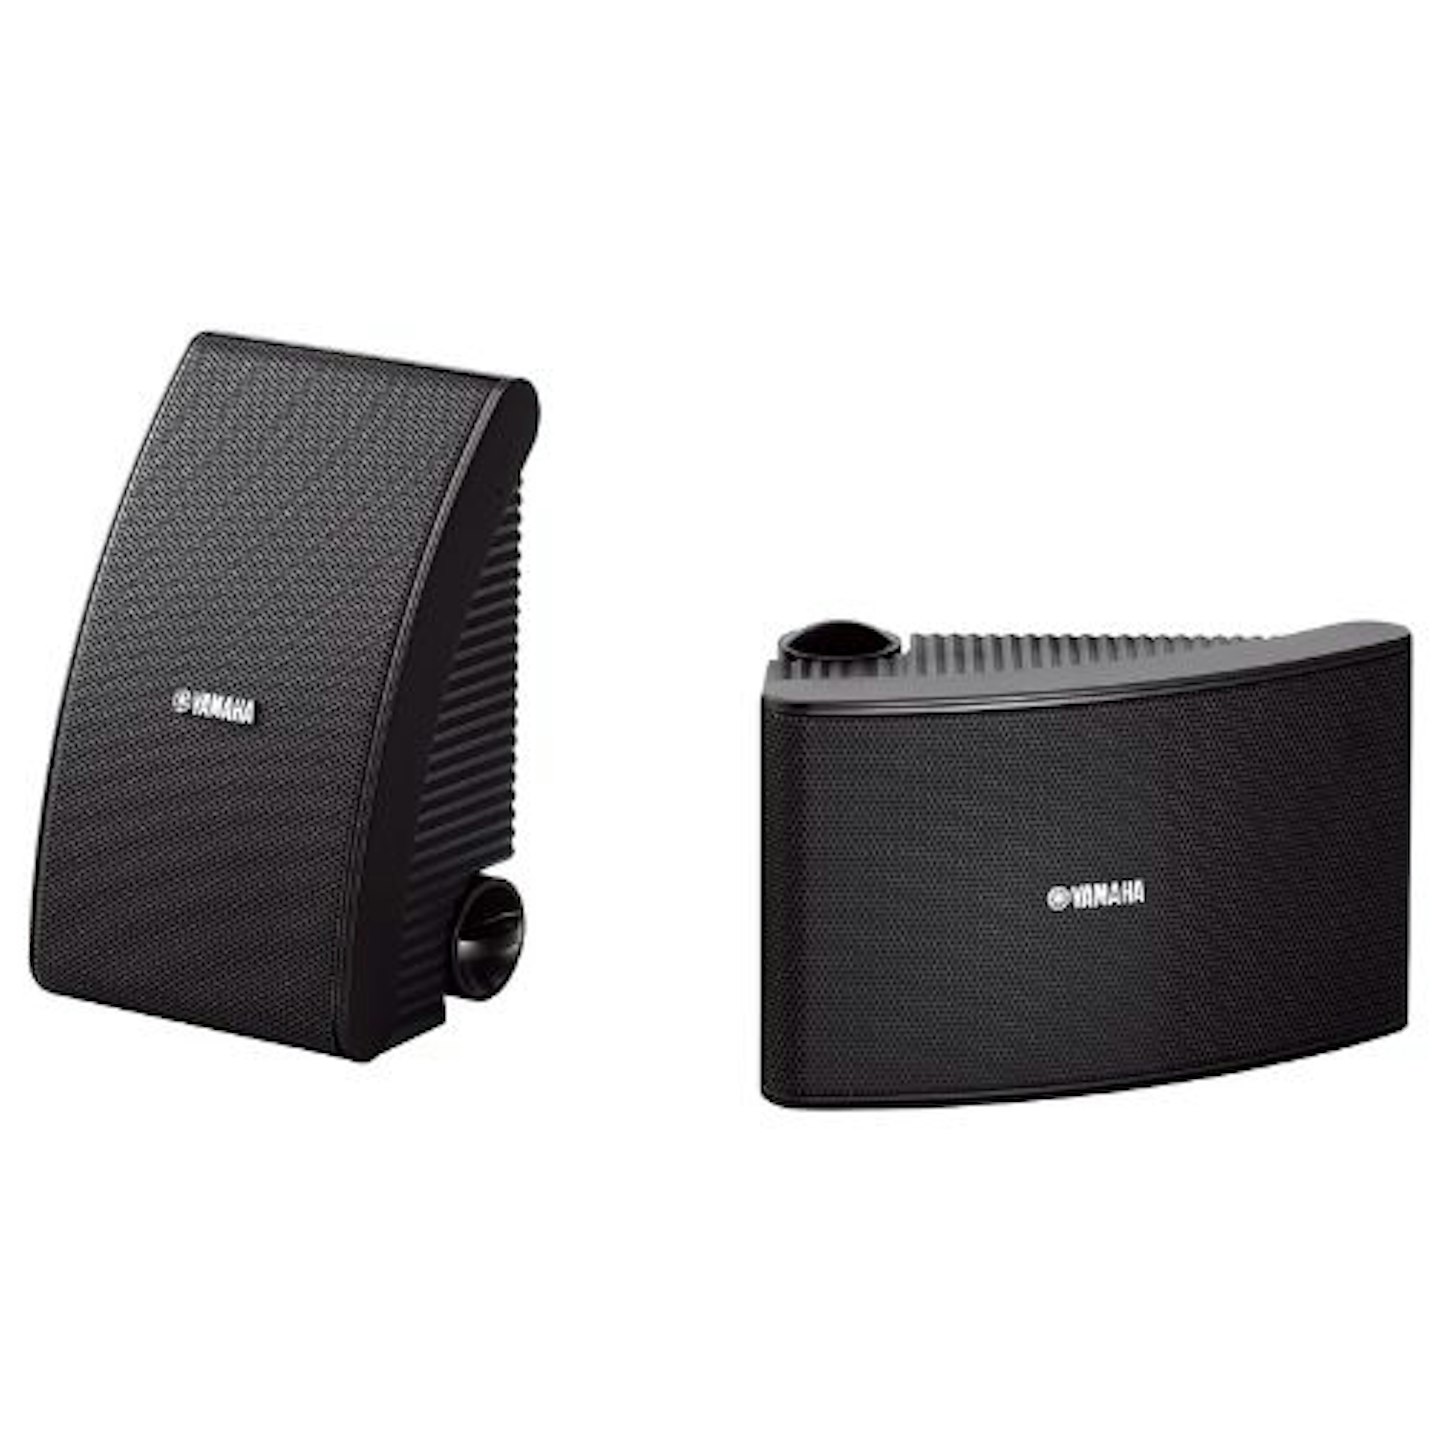 Yamaha NSAW392 120w All Weather Speakers - Black